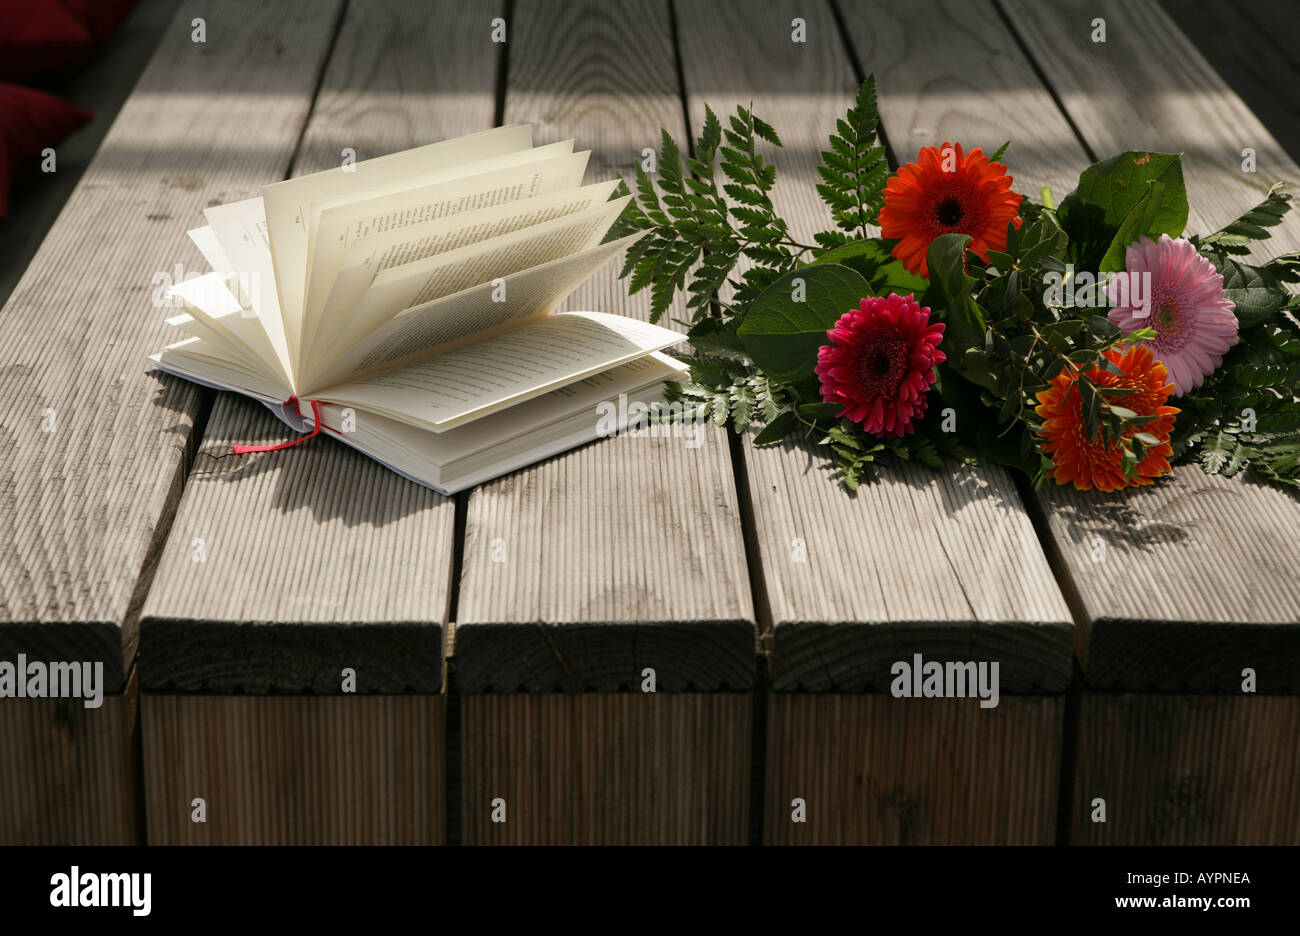 Bunch of flowers and a novel seen on a wooden table Stock Photo